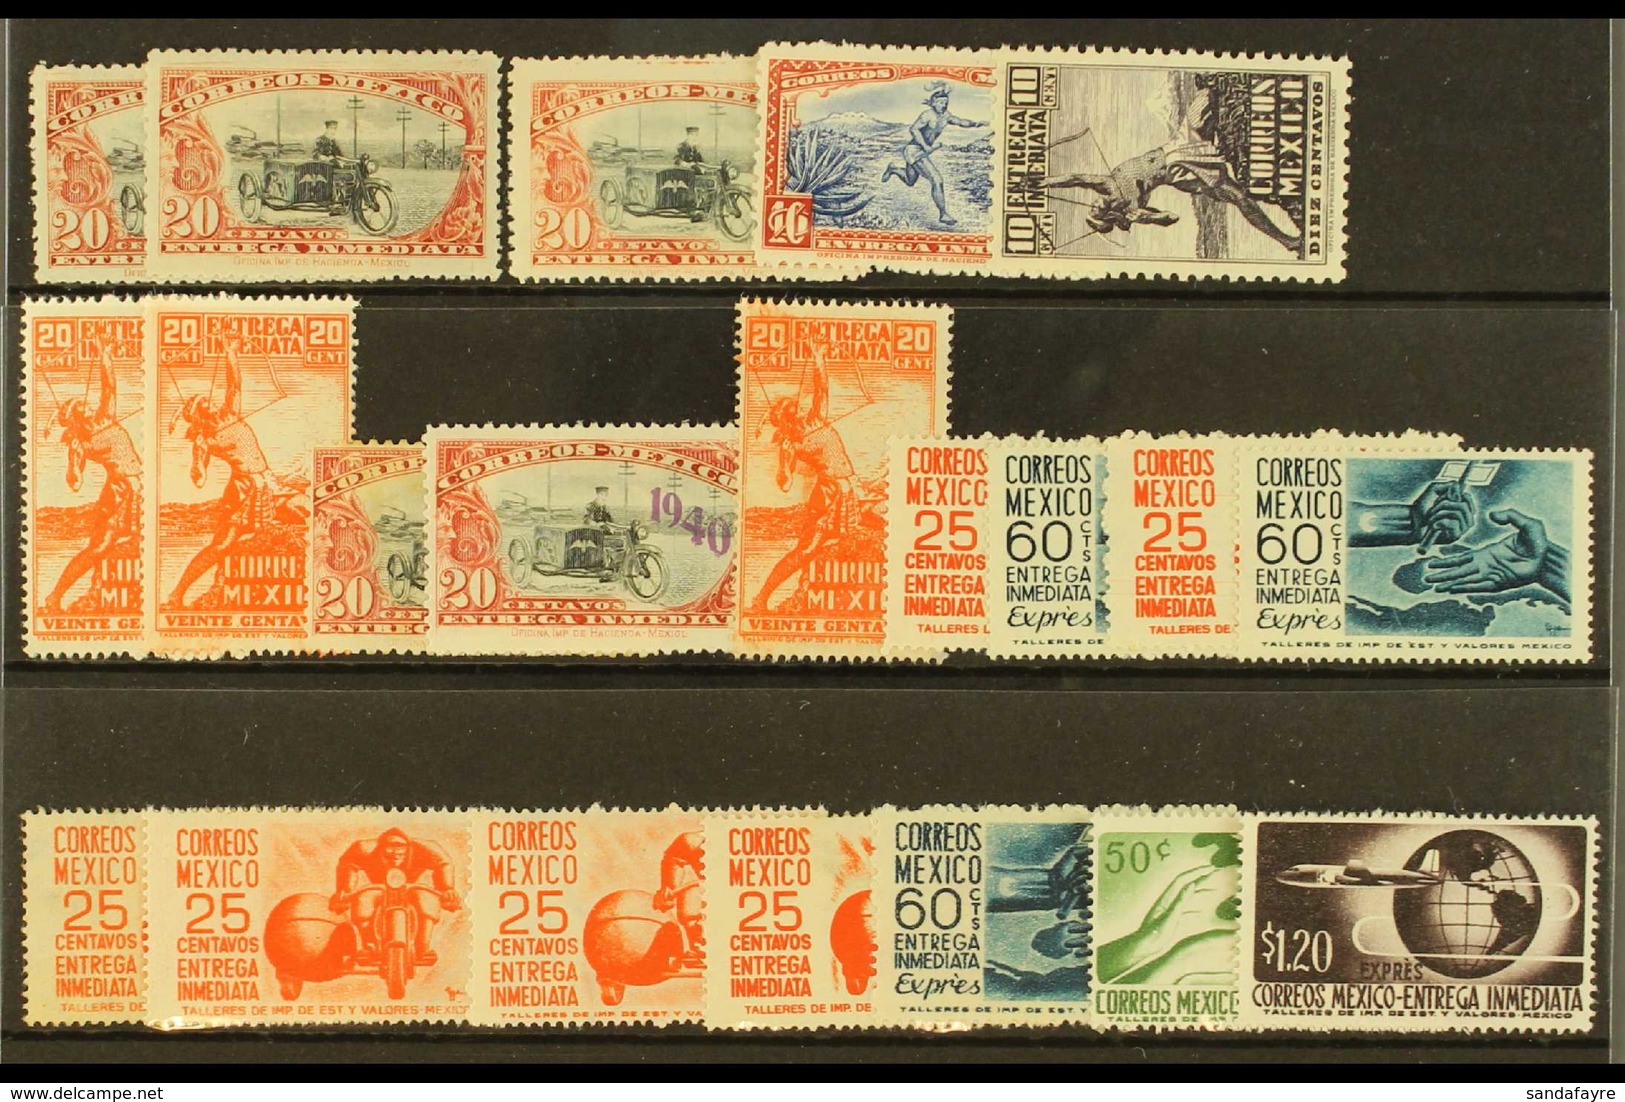 EXPRESS POST 1919-1962 MINT SELECTION With Much Being Never Hinged. Includes 1919 20c (No Wmk) X2, 1923 20c, 1951 Redraw - Mexico